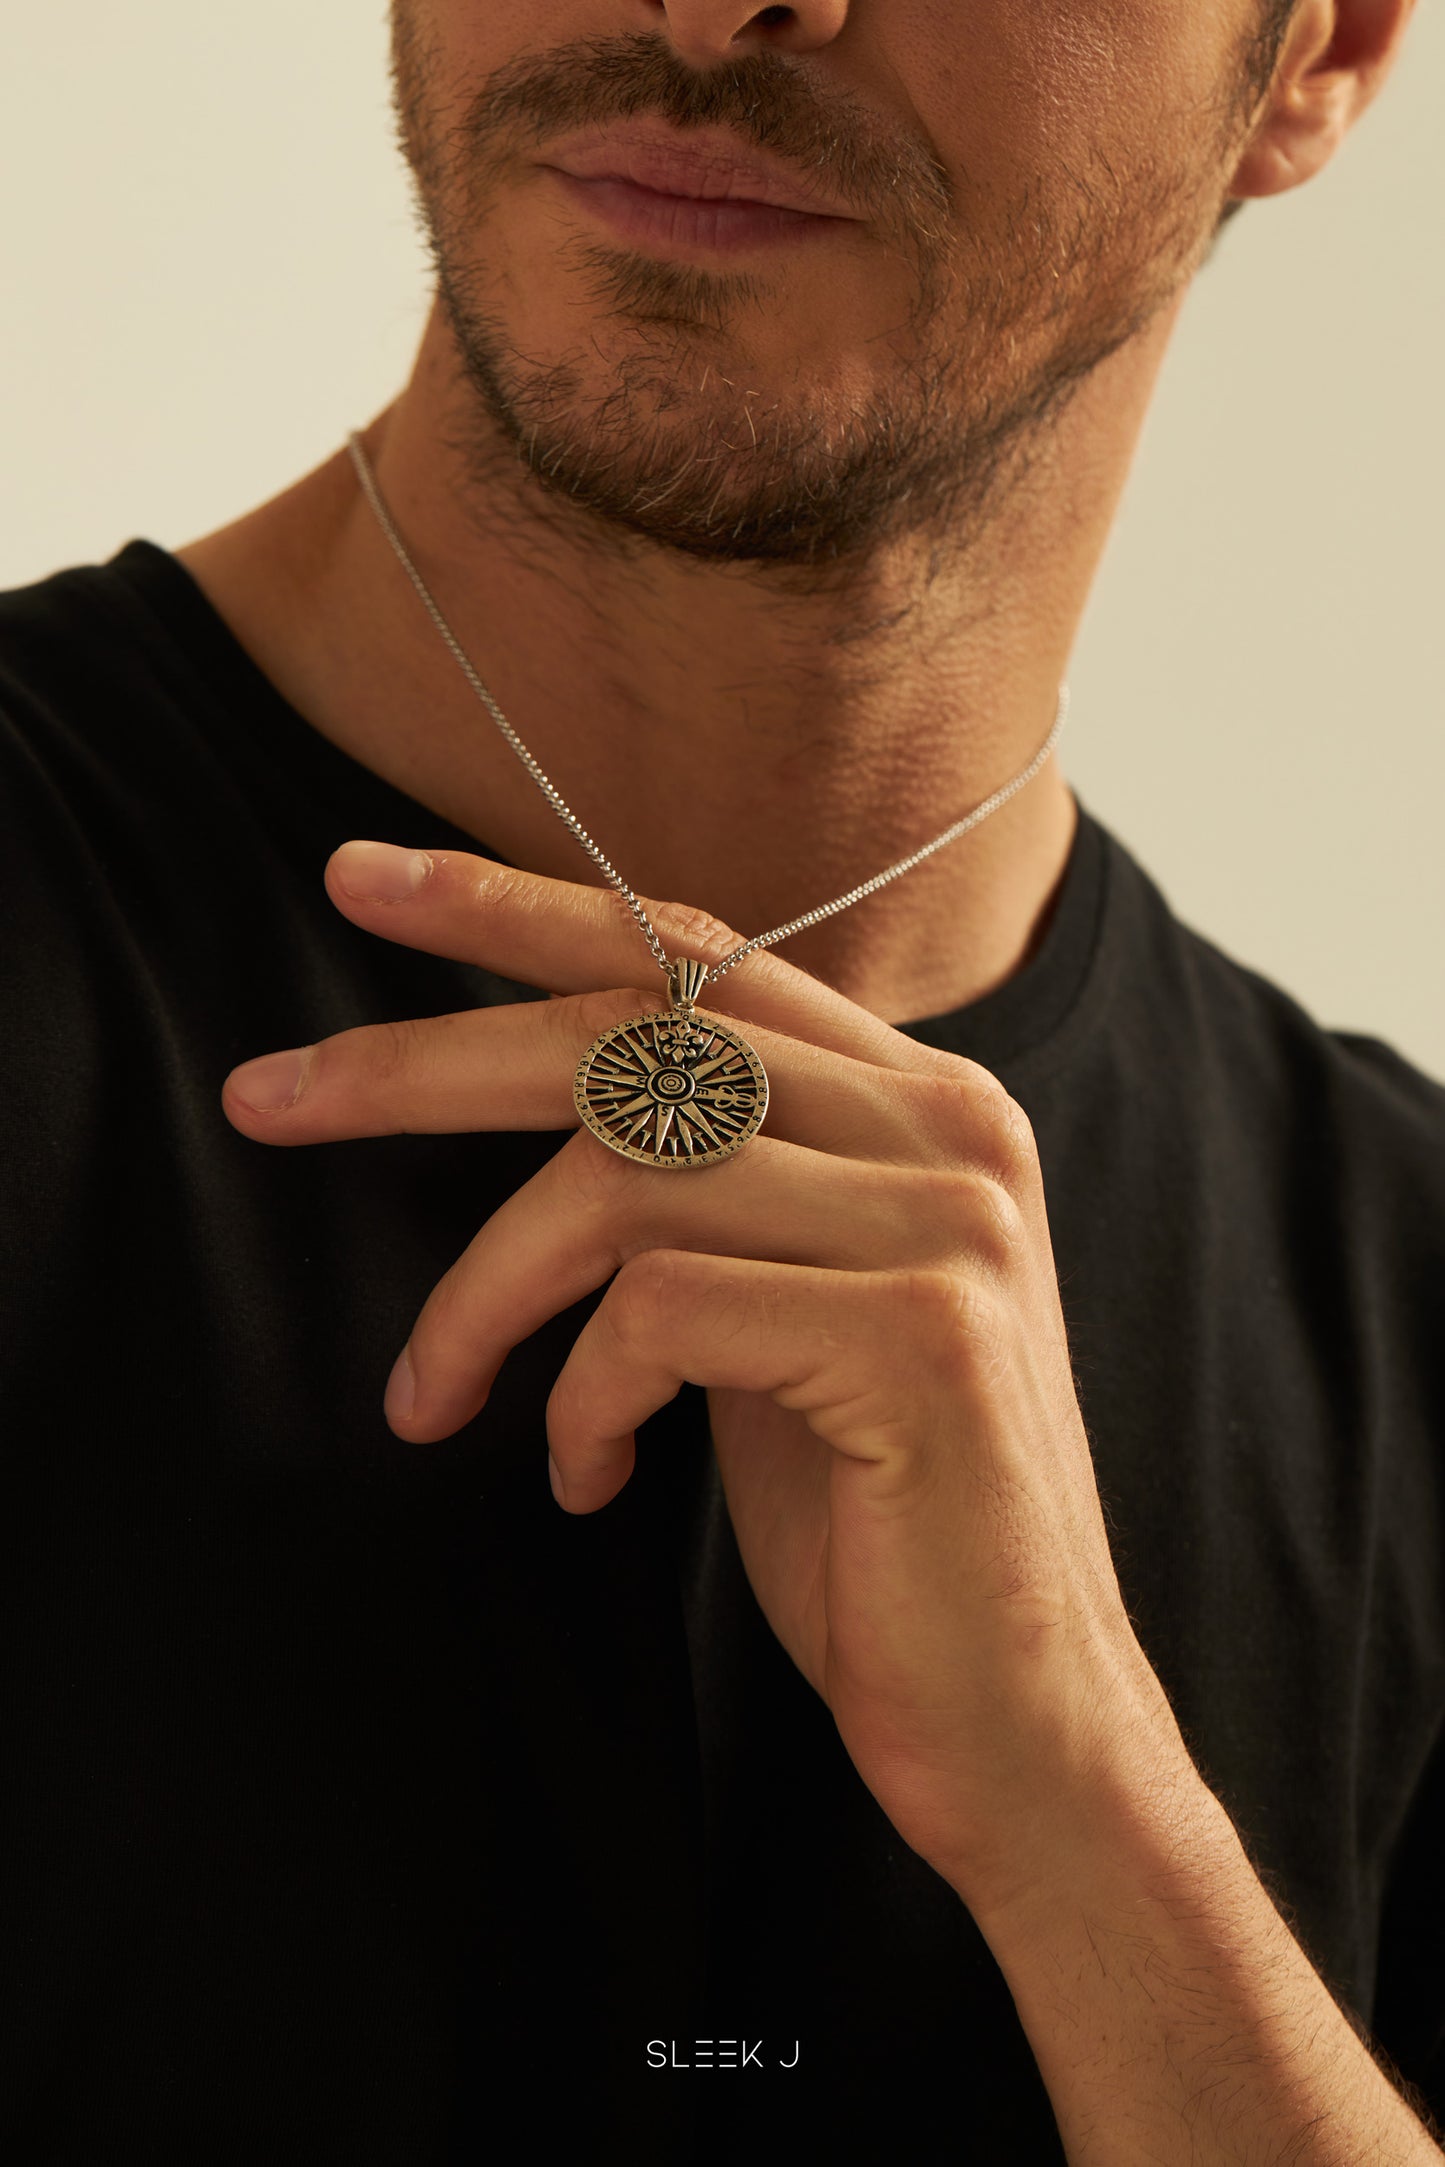 Black Oxidized Compass Pendant: 925 Sterling Silver with Rhodium-Plated Circle Rolo Link Chain